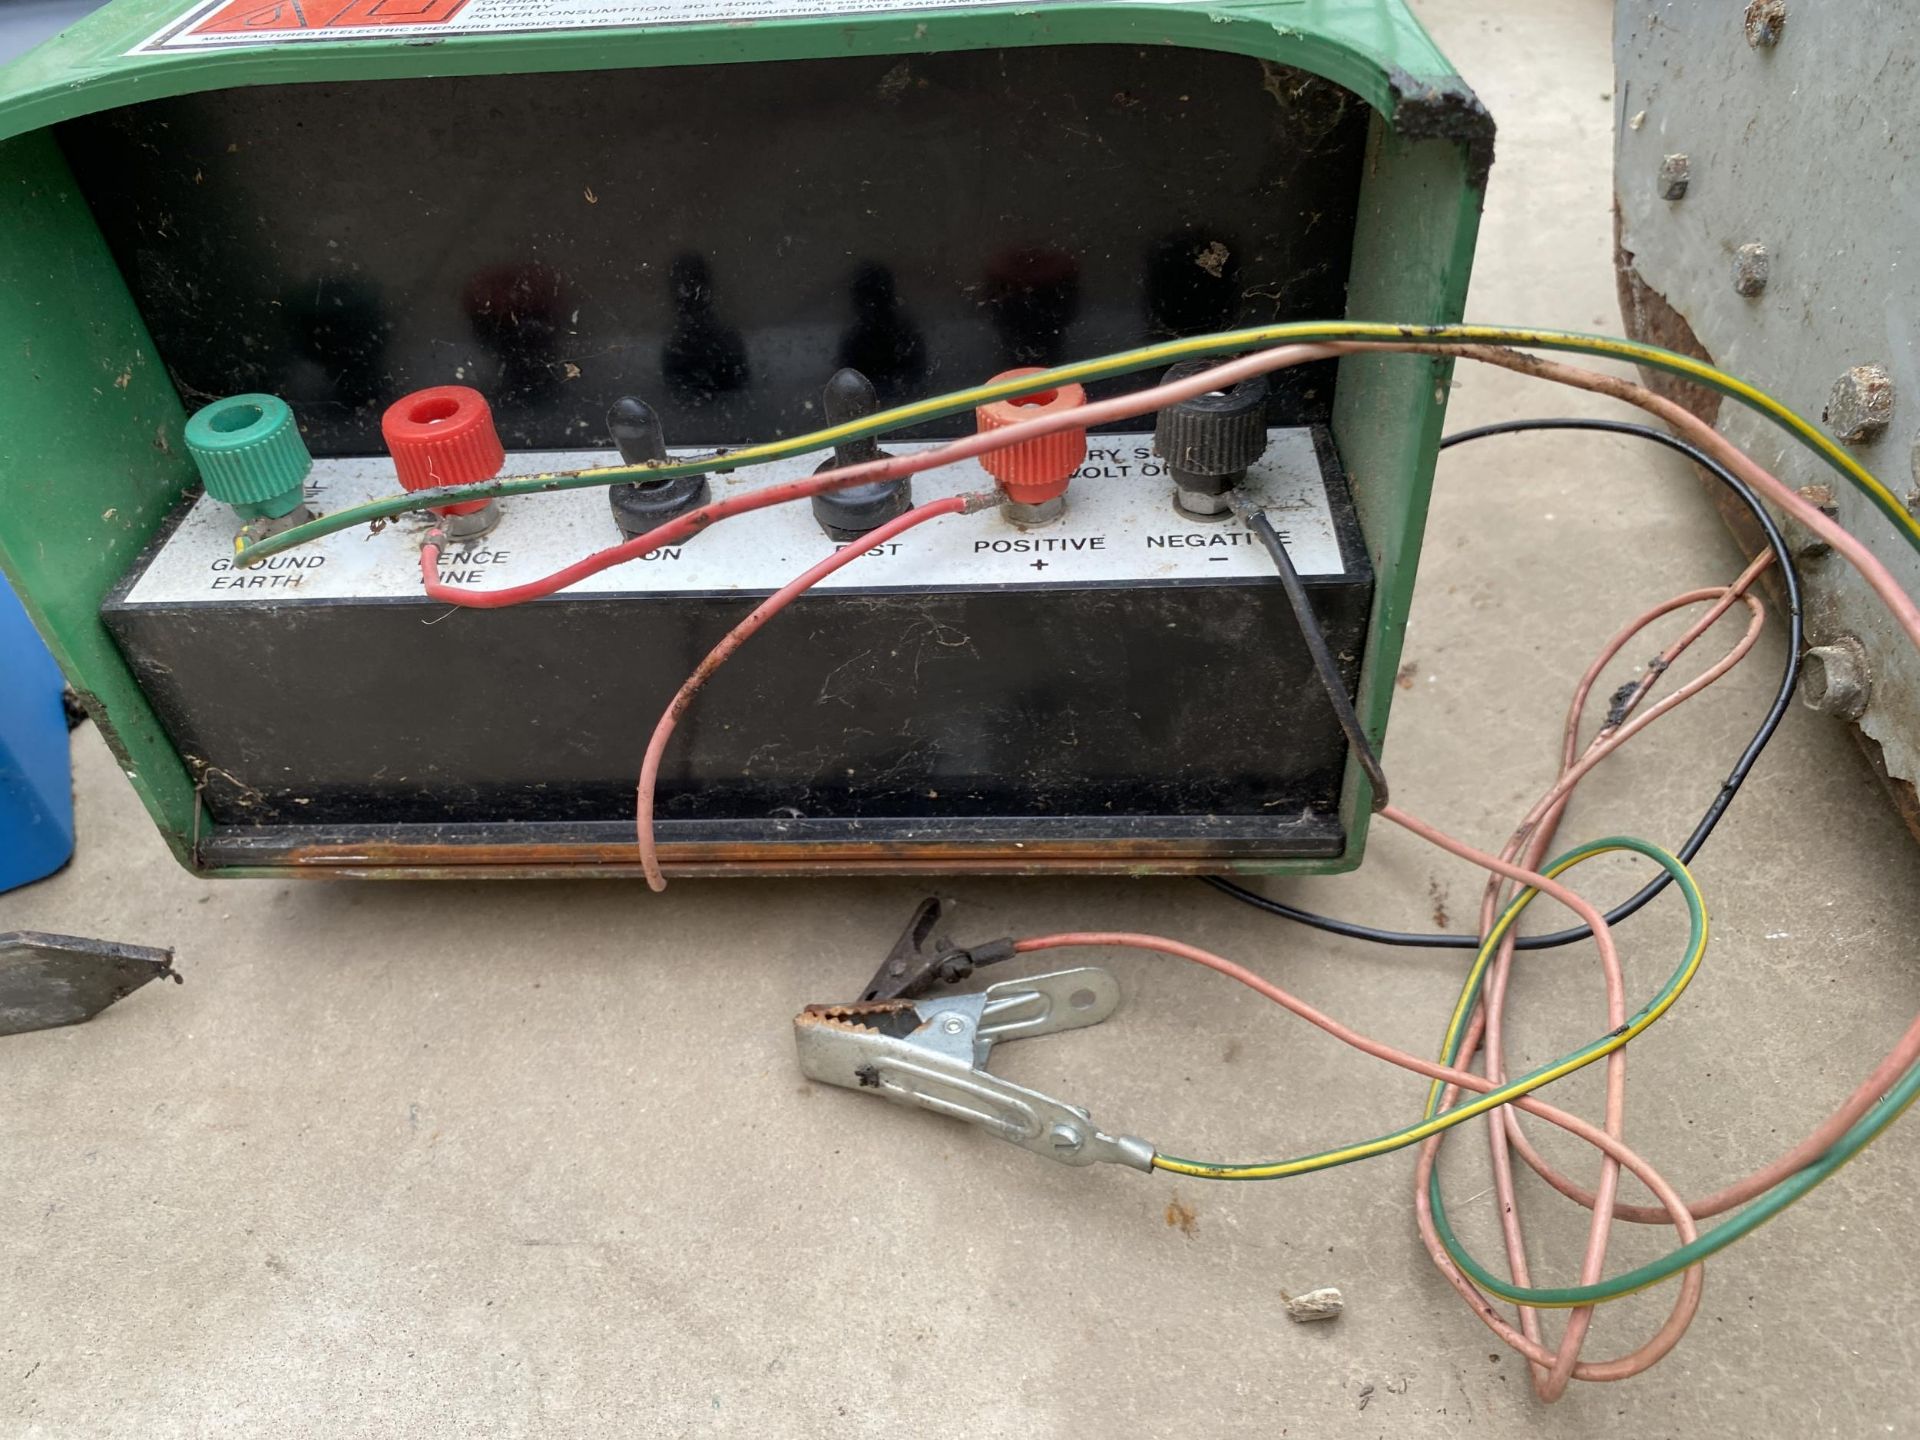 AN ELECTRIC SHEPARD BATTERY ELECTRIC FENCE UNIT - Image 3 of 3